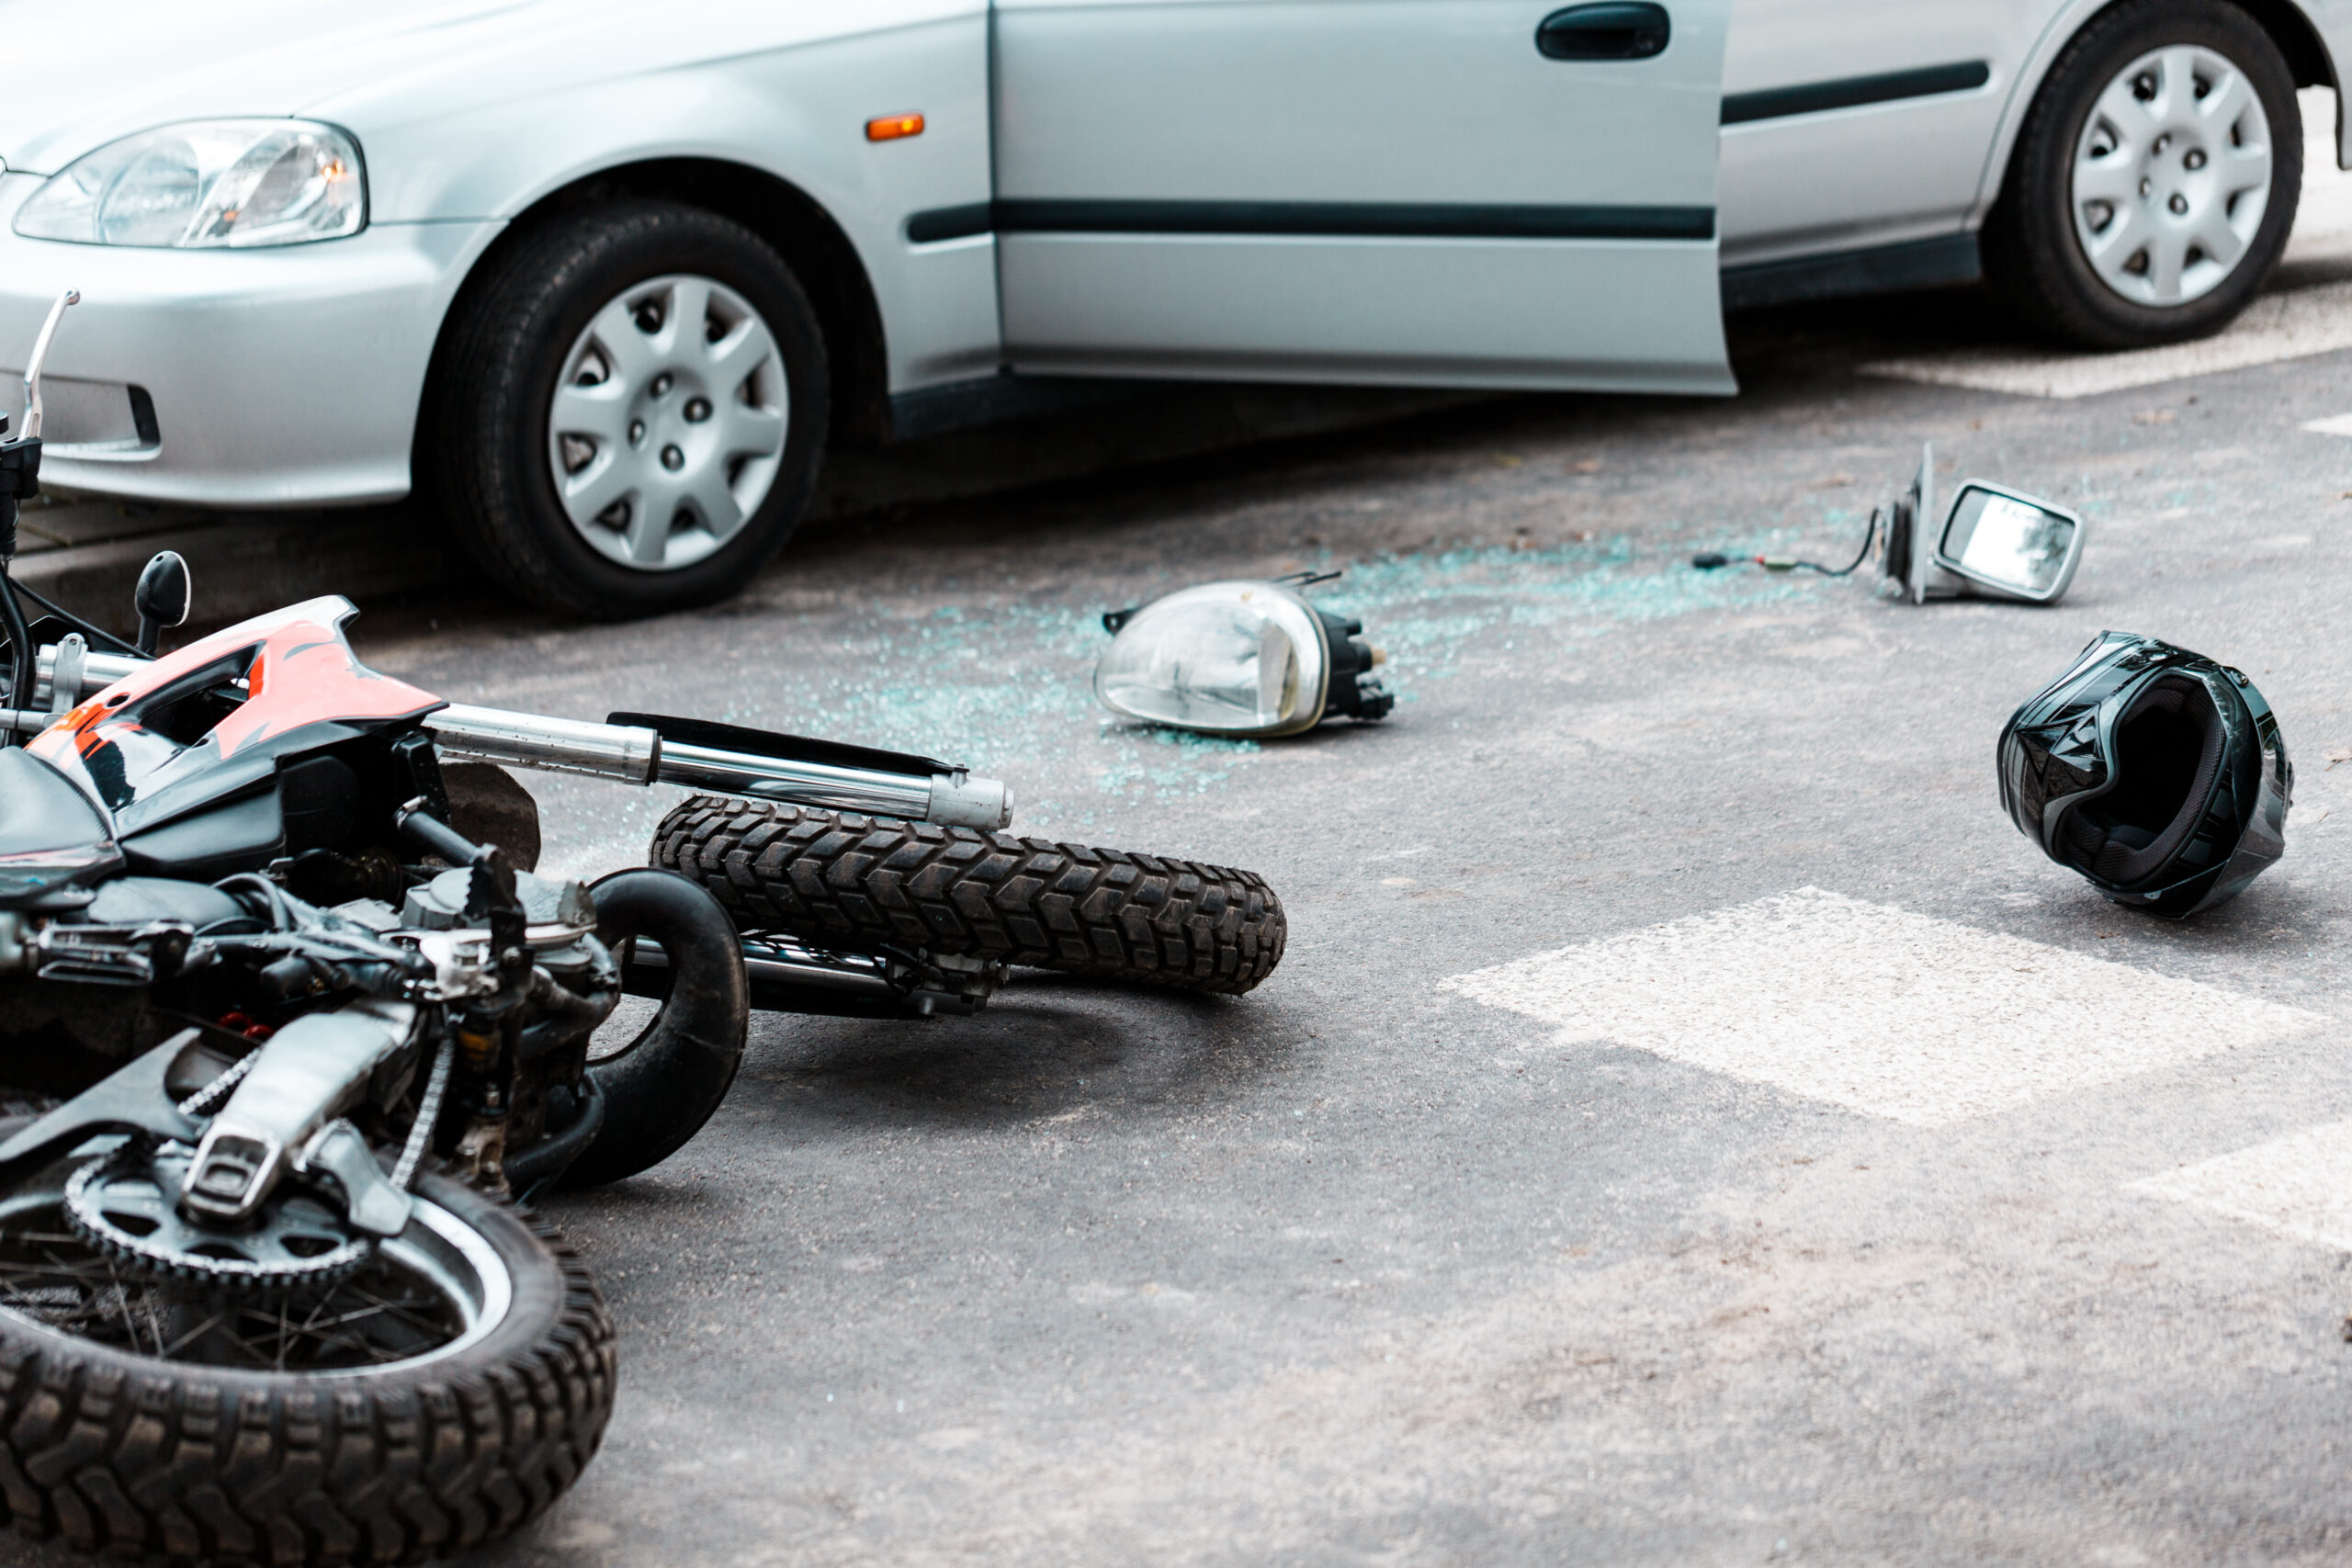 Featured Image for: Should I Get a Lawyer for a Motorcycle Accident?